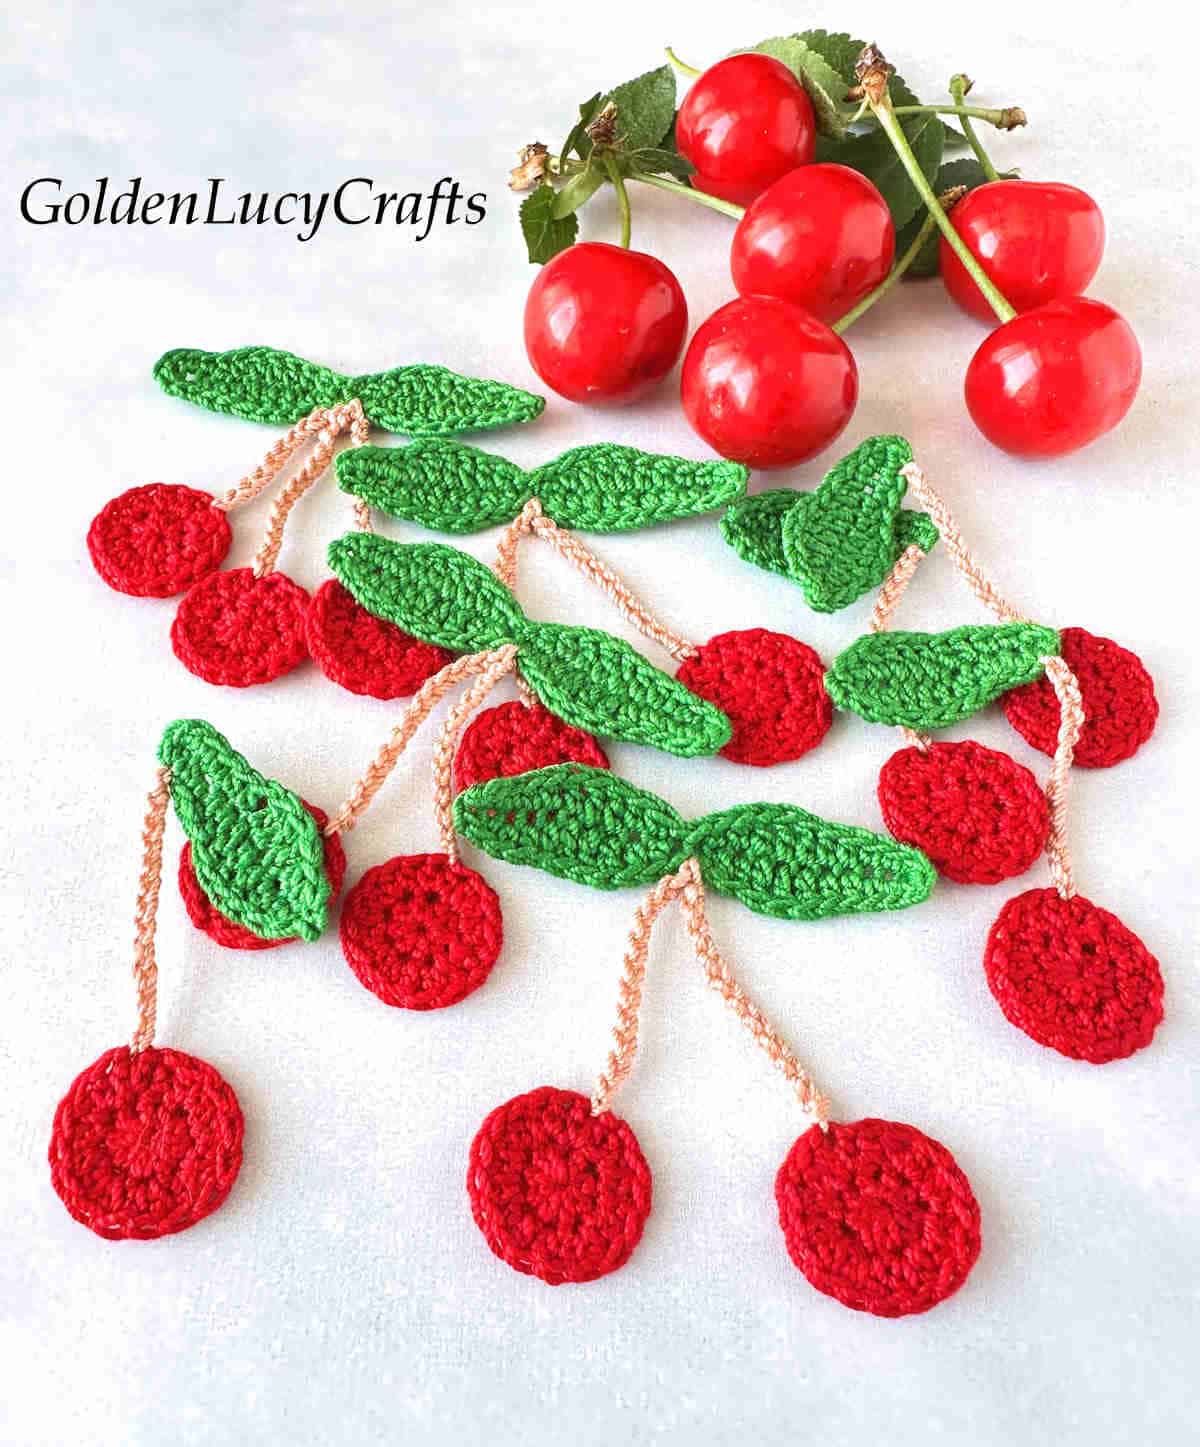 Crochet cherry appliques and real cherries in the background.